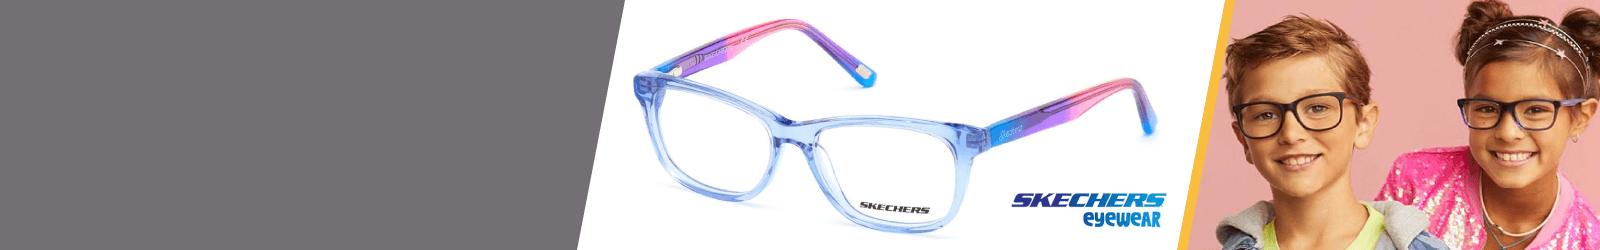 Skechers  Eyewear for Kids from 0 to 24-month-old